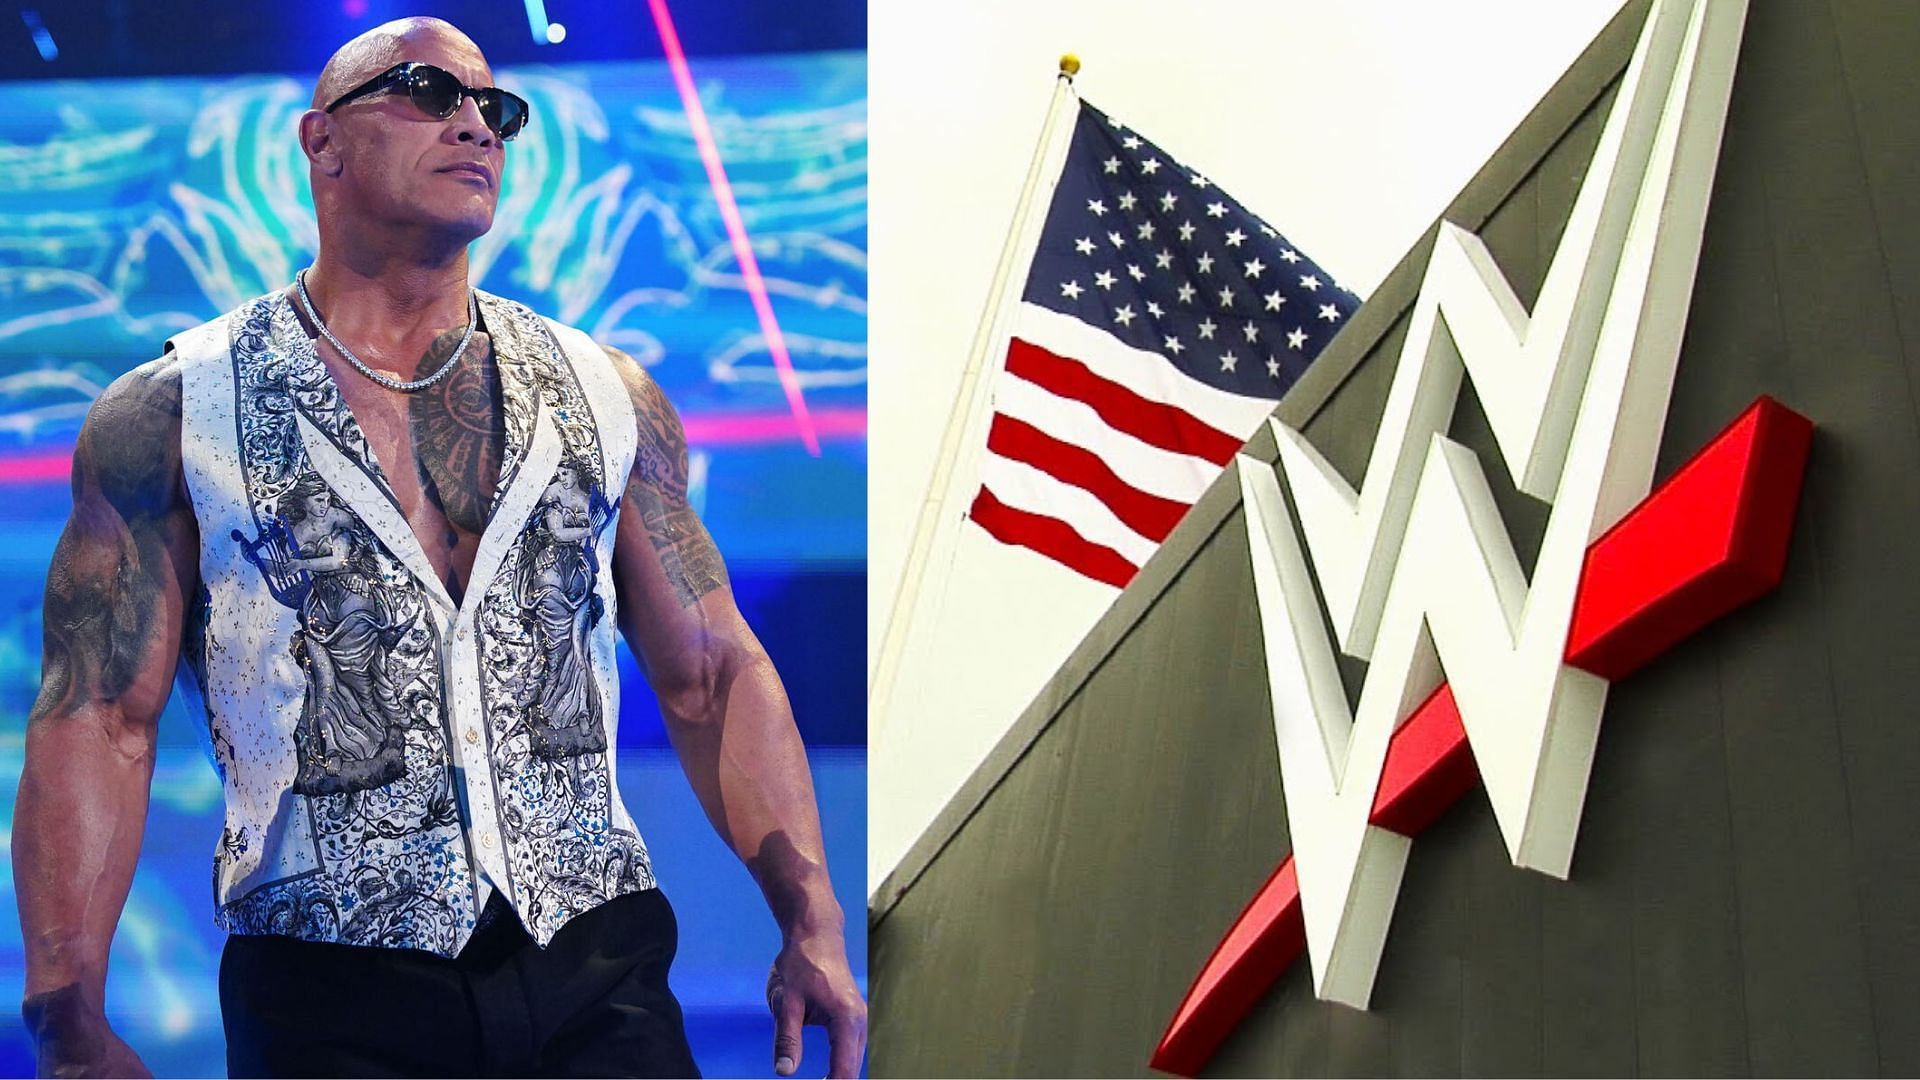 The Rock has pushed boundaries during his latest WWE run